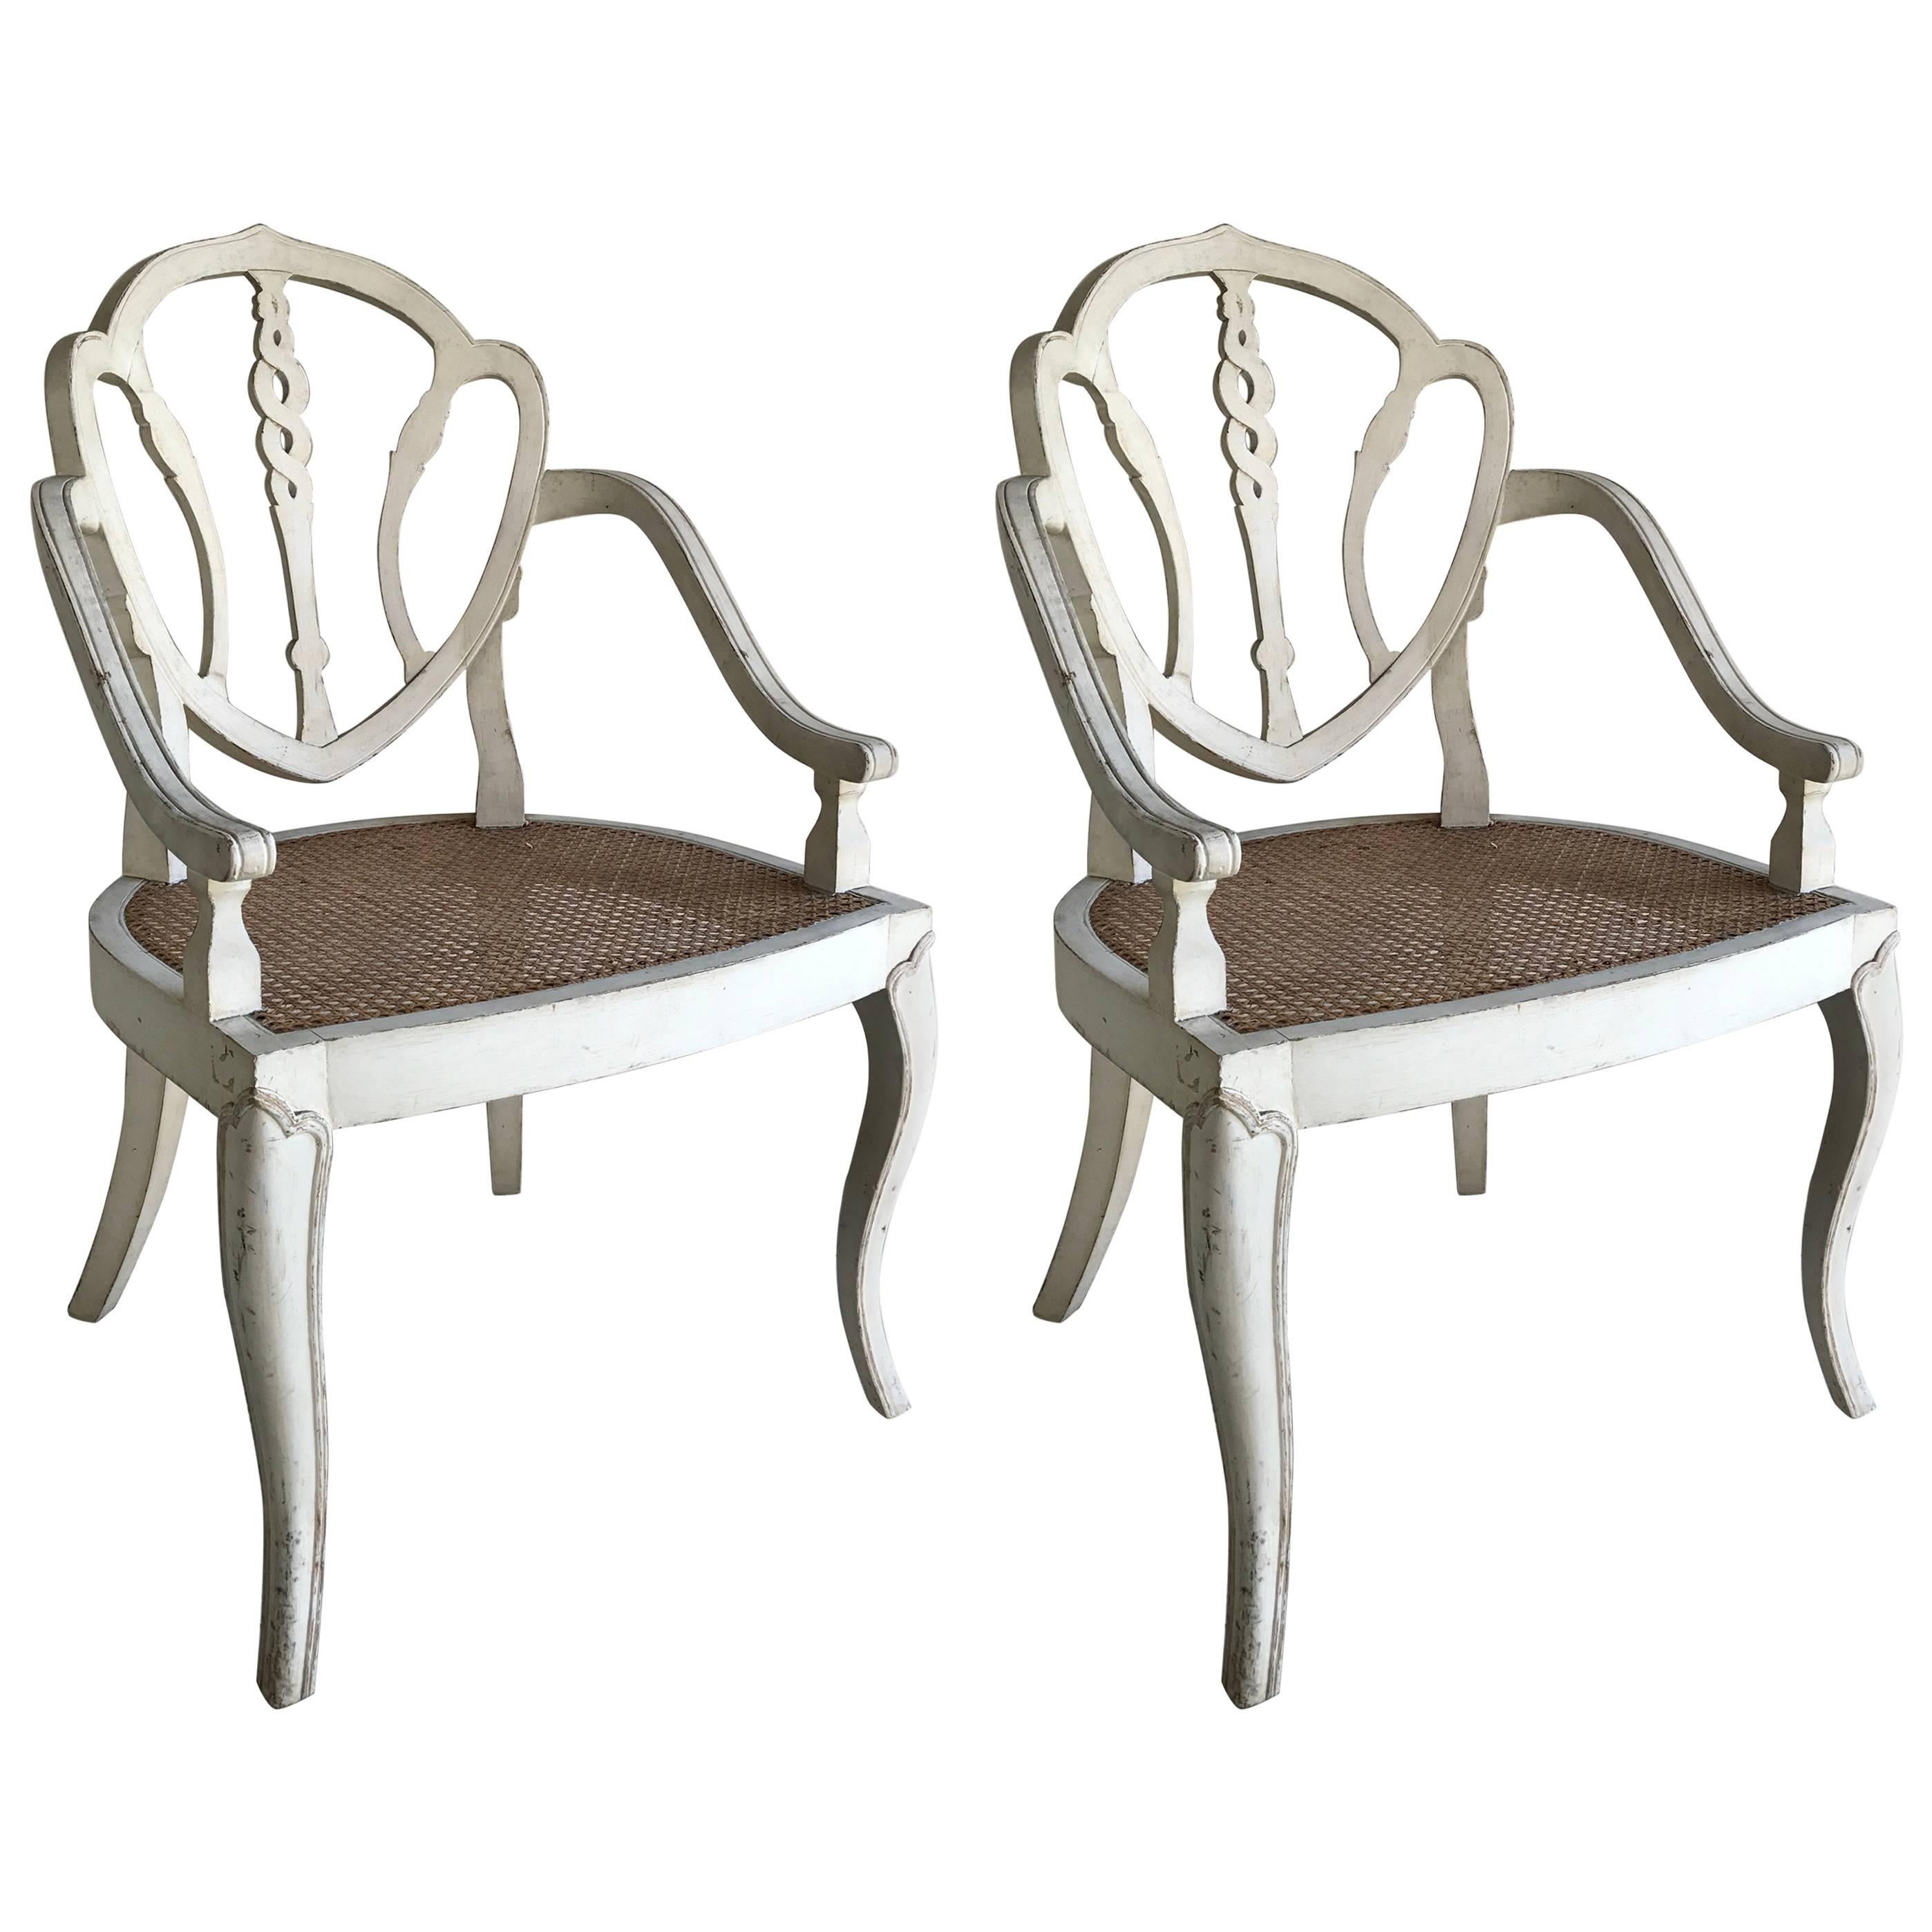 Pair of White Washed Armchairs with Cane Seating